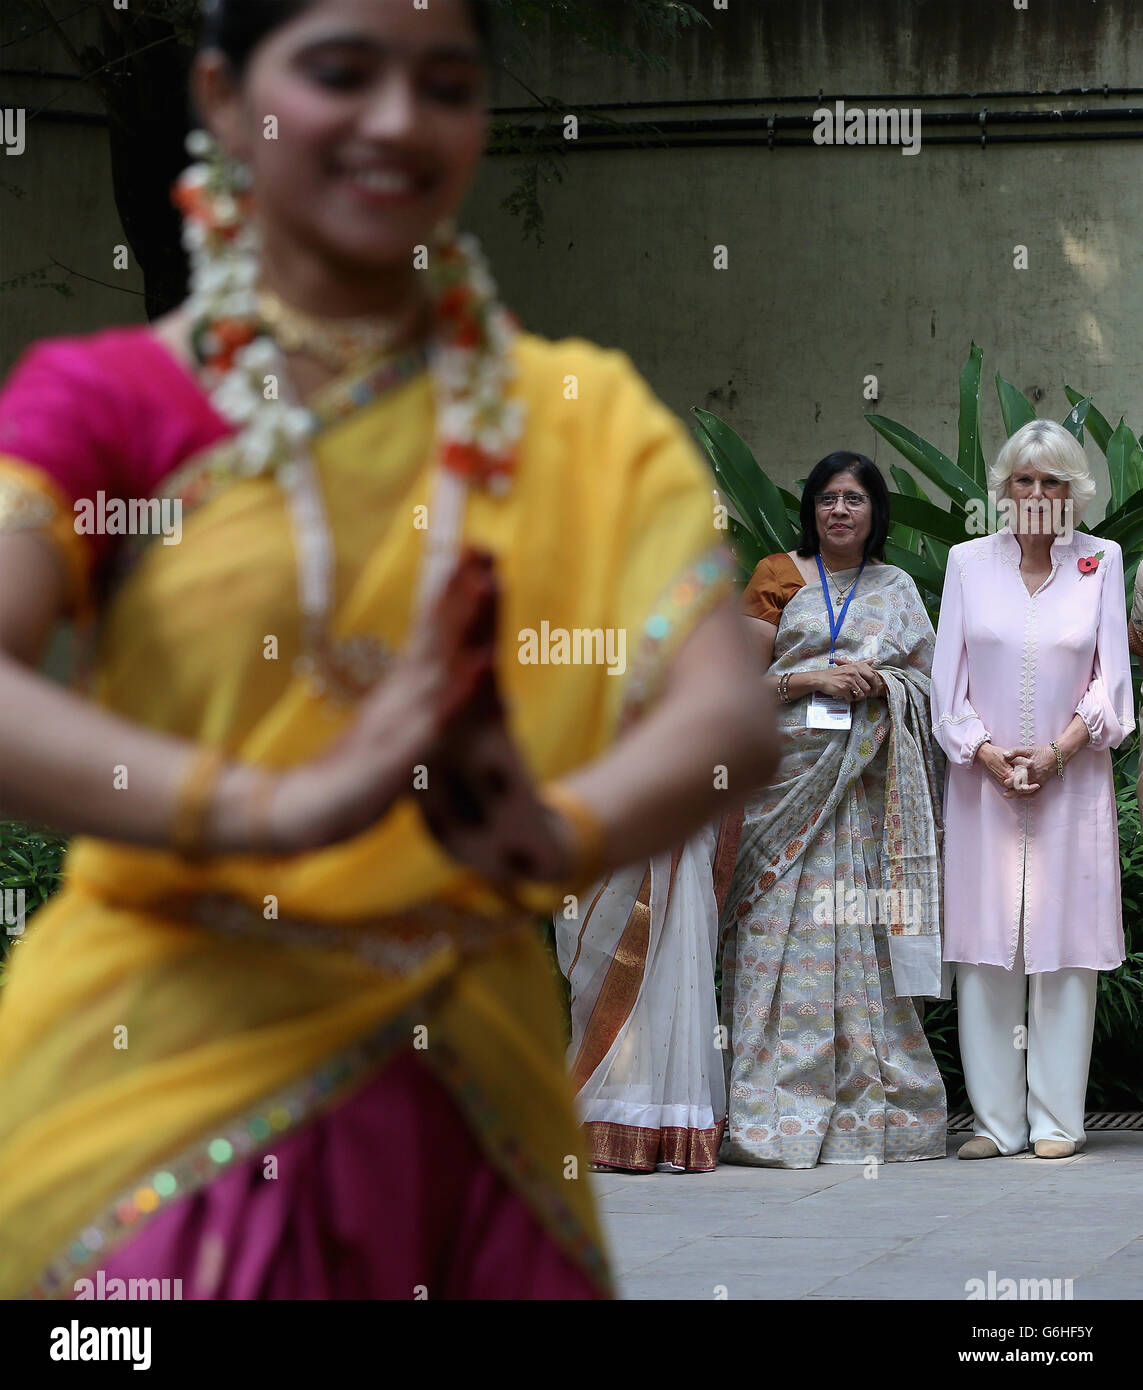 The Duchess of Cornwall watches dancers at Asha Sadan (House of Hope) for children who have been abandoned or abused, in Mumbai, on the fourth day of their official visit to India and Sri Lanka. PRESS ASSOCIATION Photo. Picture date: Saturday November 9, 2013. See PA story ROYAL Tour. Photo credit should read: Chris Jackson/PA Wire Stock Photo